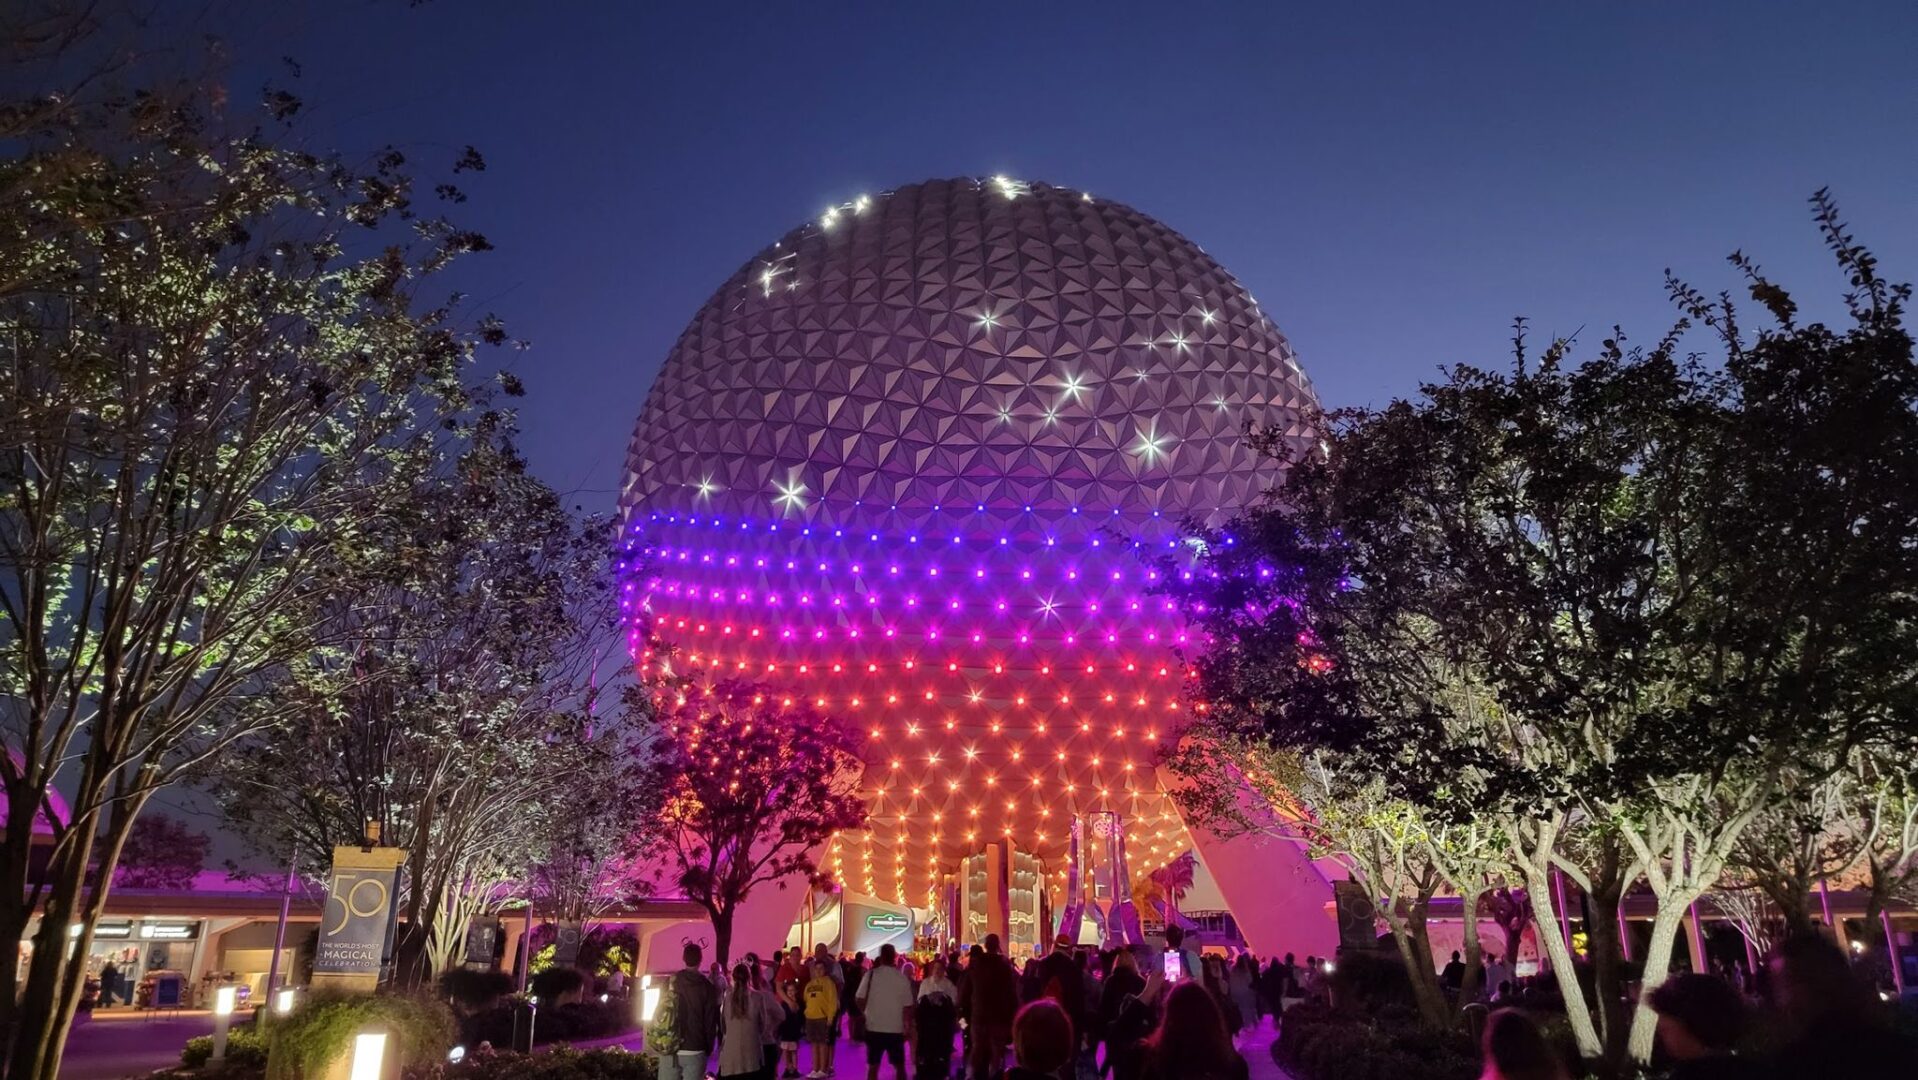 Spaceship Earth To Feature New Light Show For the 2023 Flower and Garden Festival